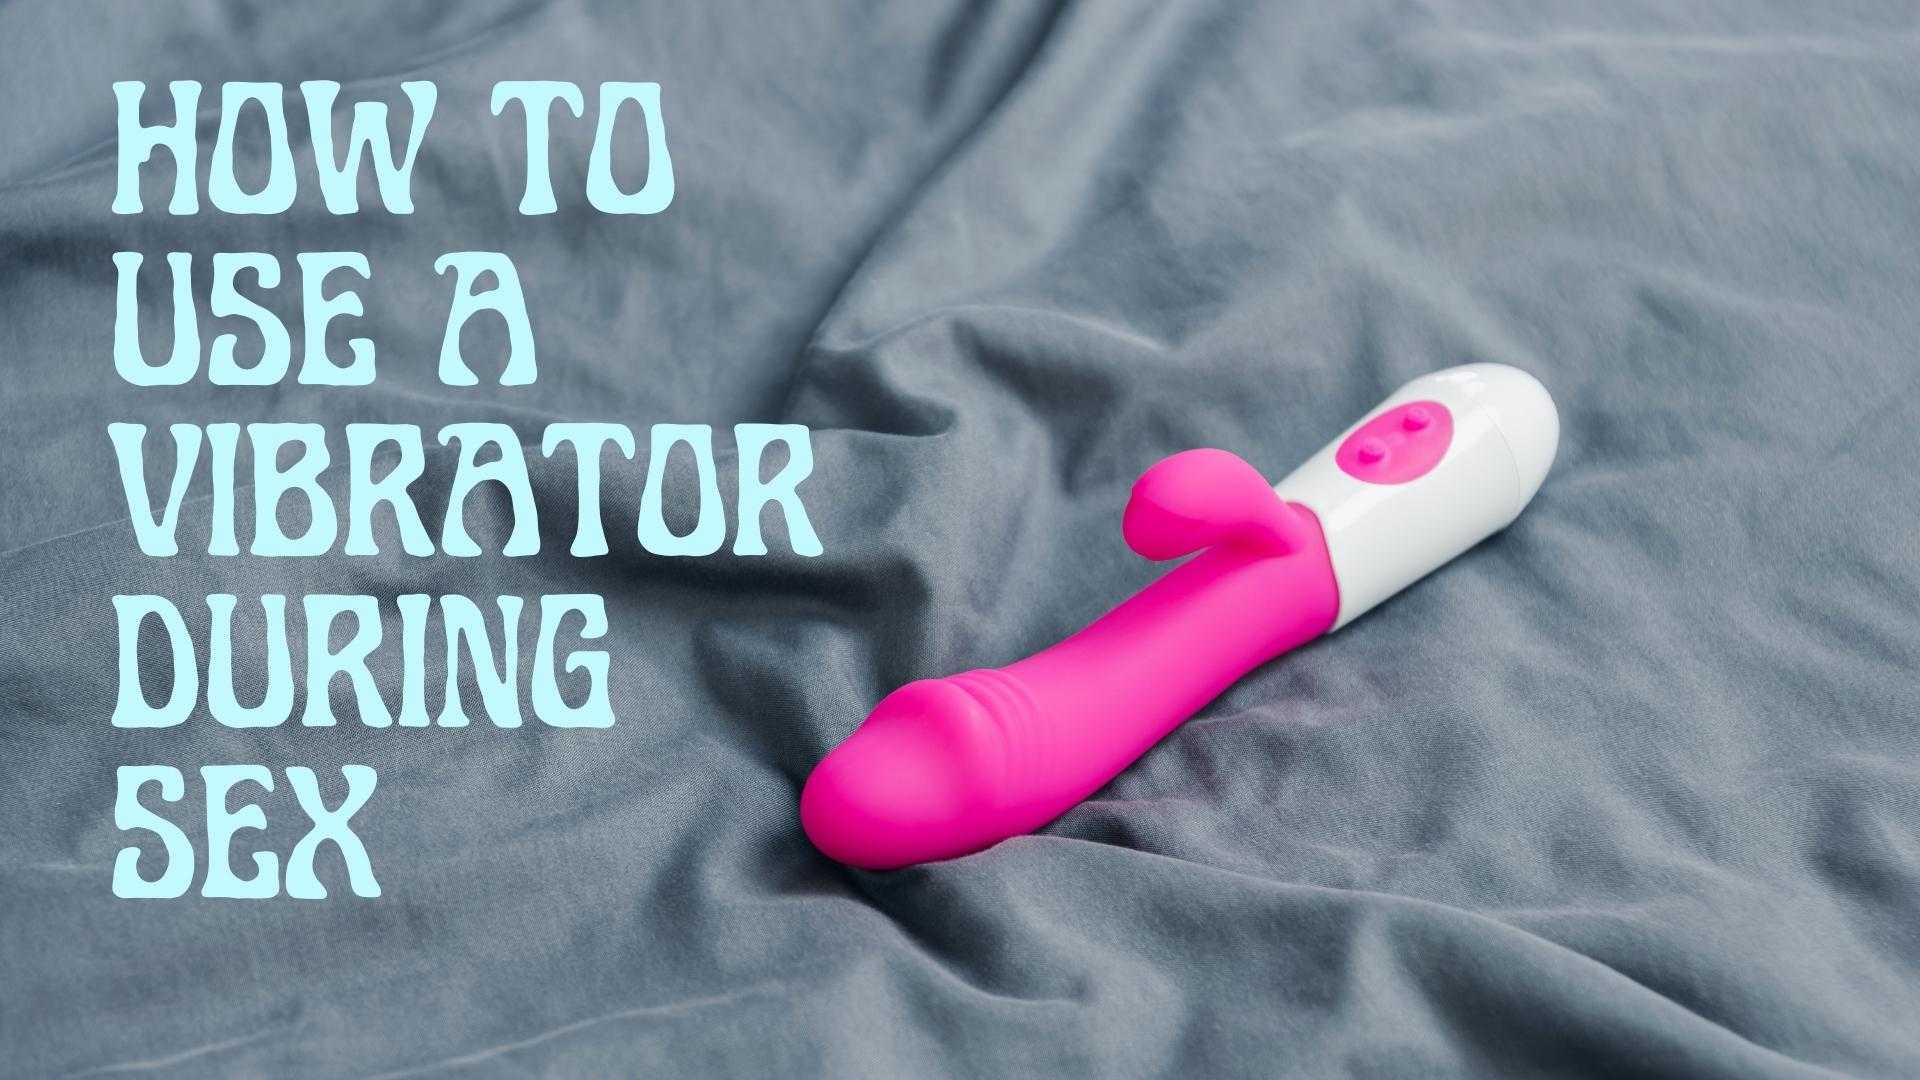 How To Use A Vibrator